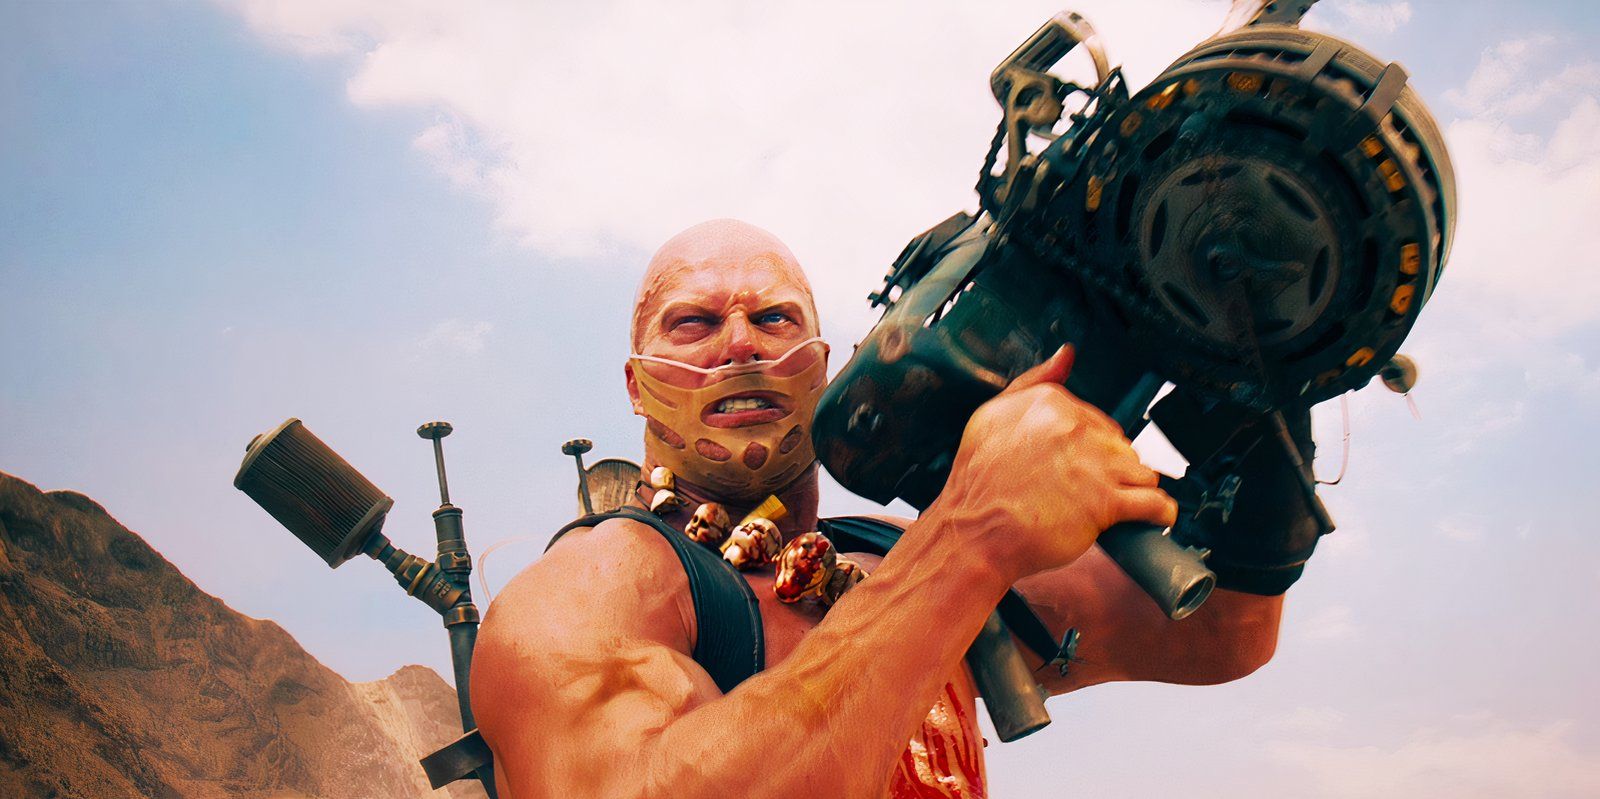 Nathan Jones as Rictus in Mad Max Fury Road